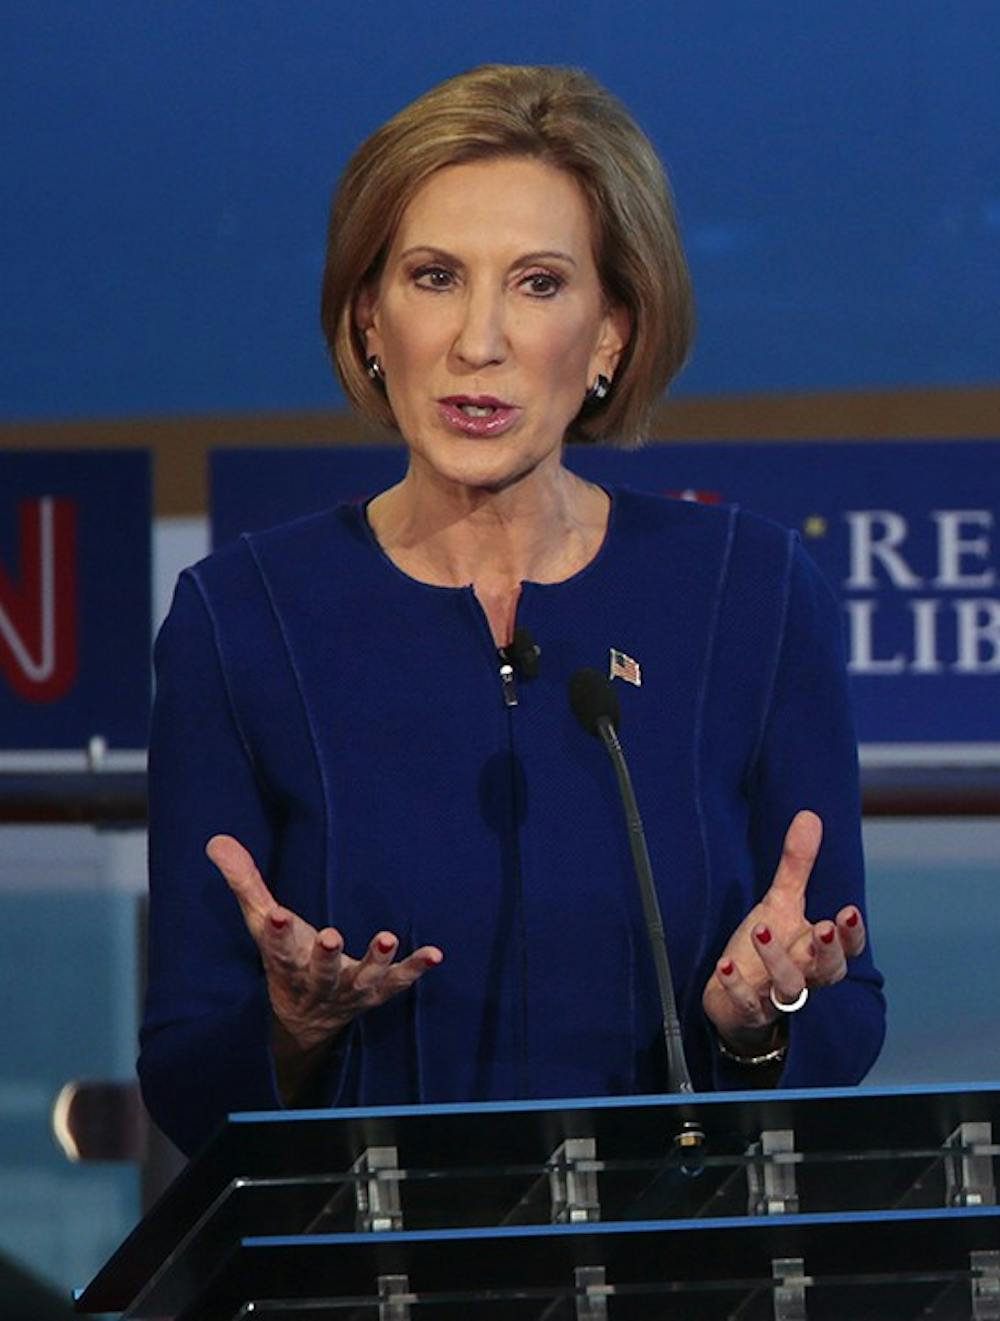 Republican presidential candidate Carly Fiorina on the debate stage at the Reagan Library in Simi Valley, Calif., on Wednesday, Sept. 16, 2015. (Robert Gauthier/Los Angeles Times/TNS)